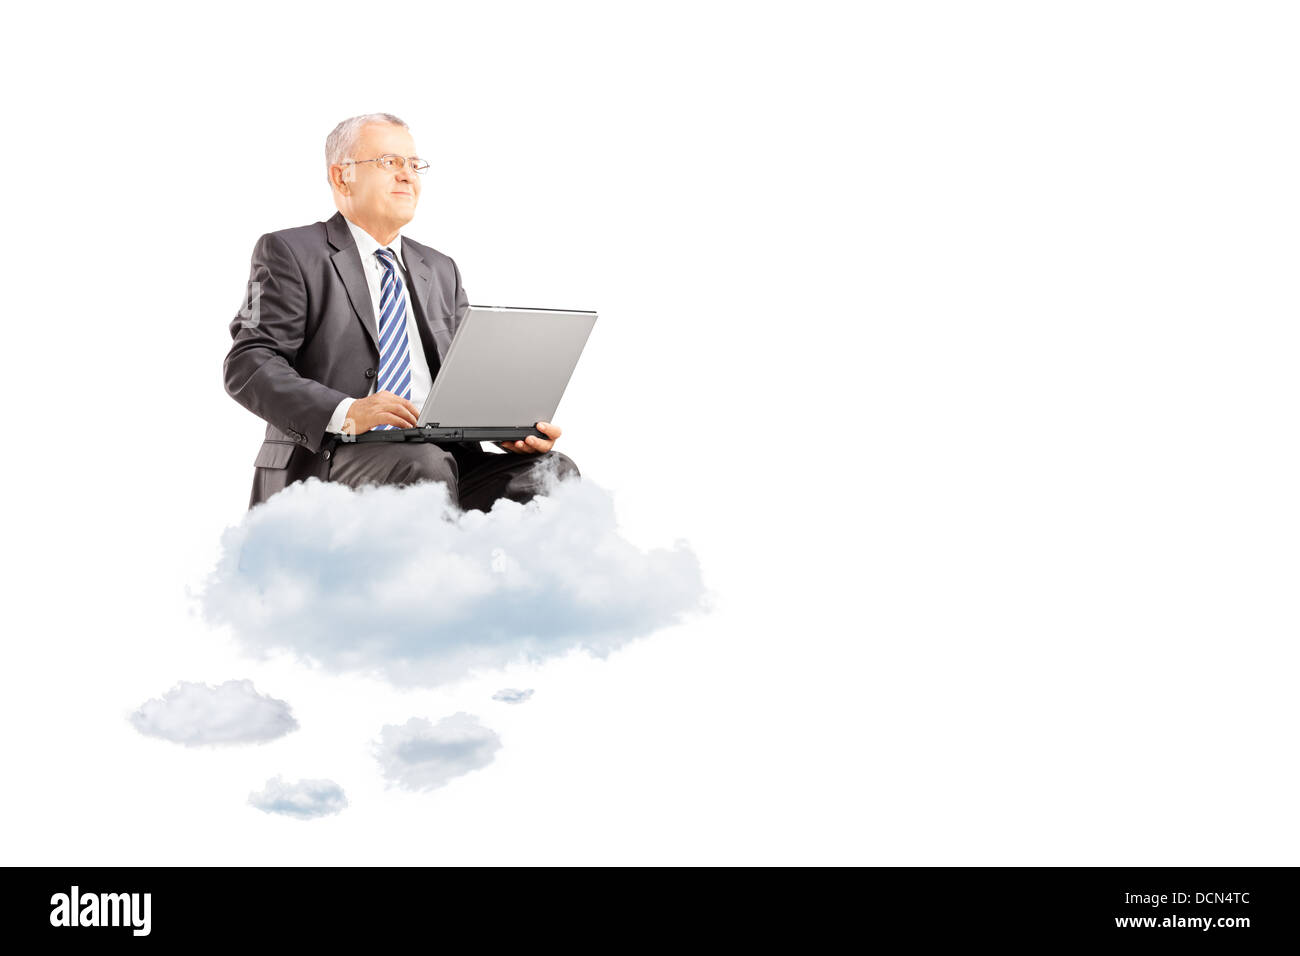 Mature businessman wearing suit and flying on clouds with laptop Stock Photo